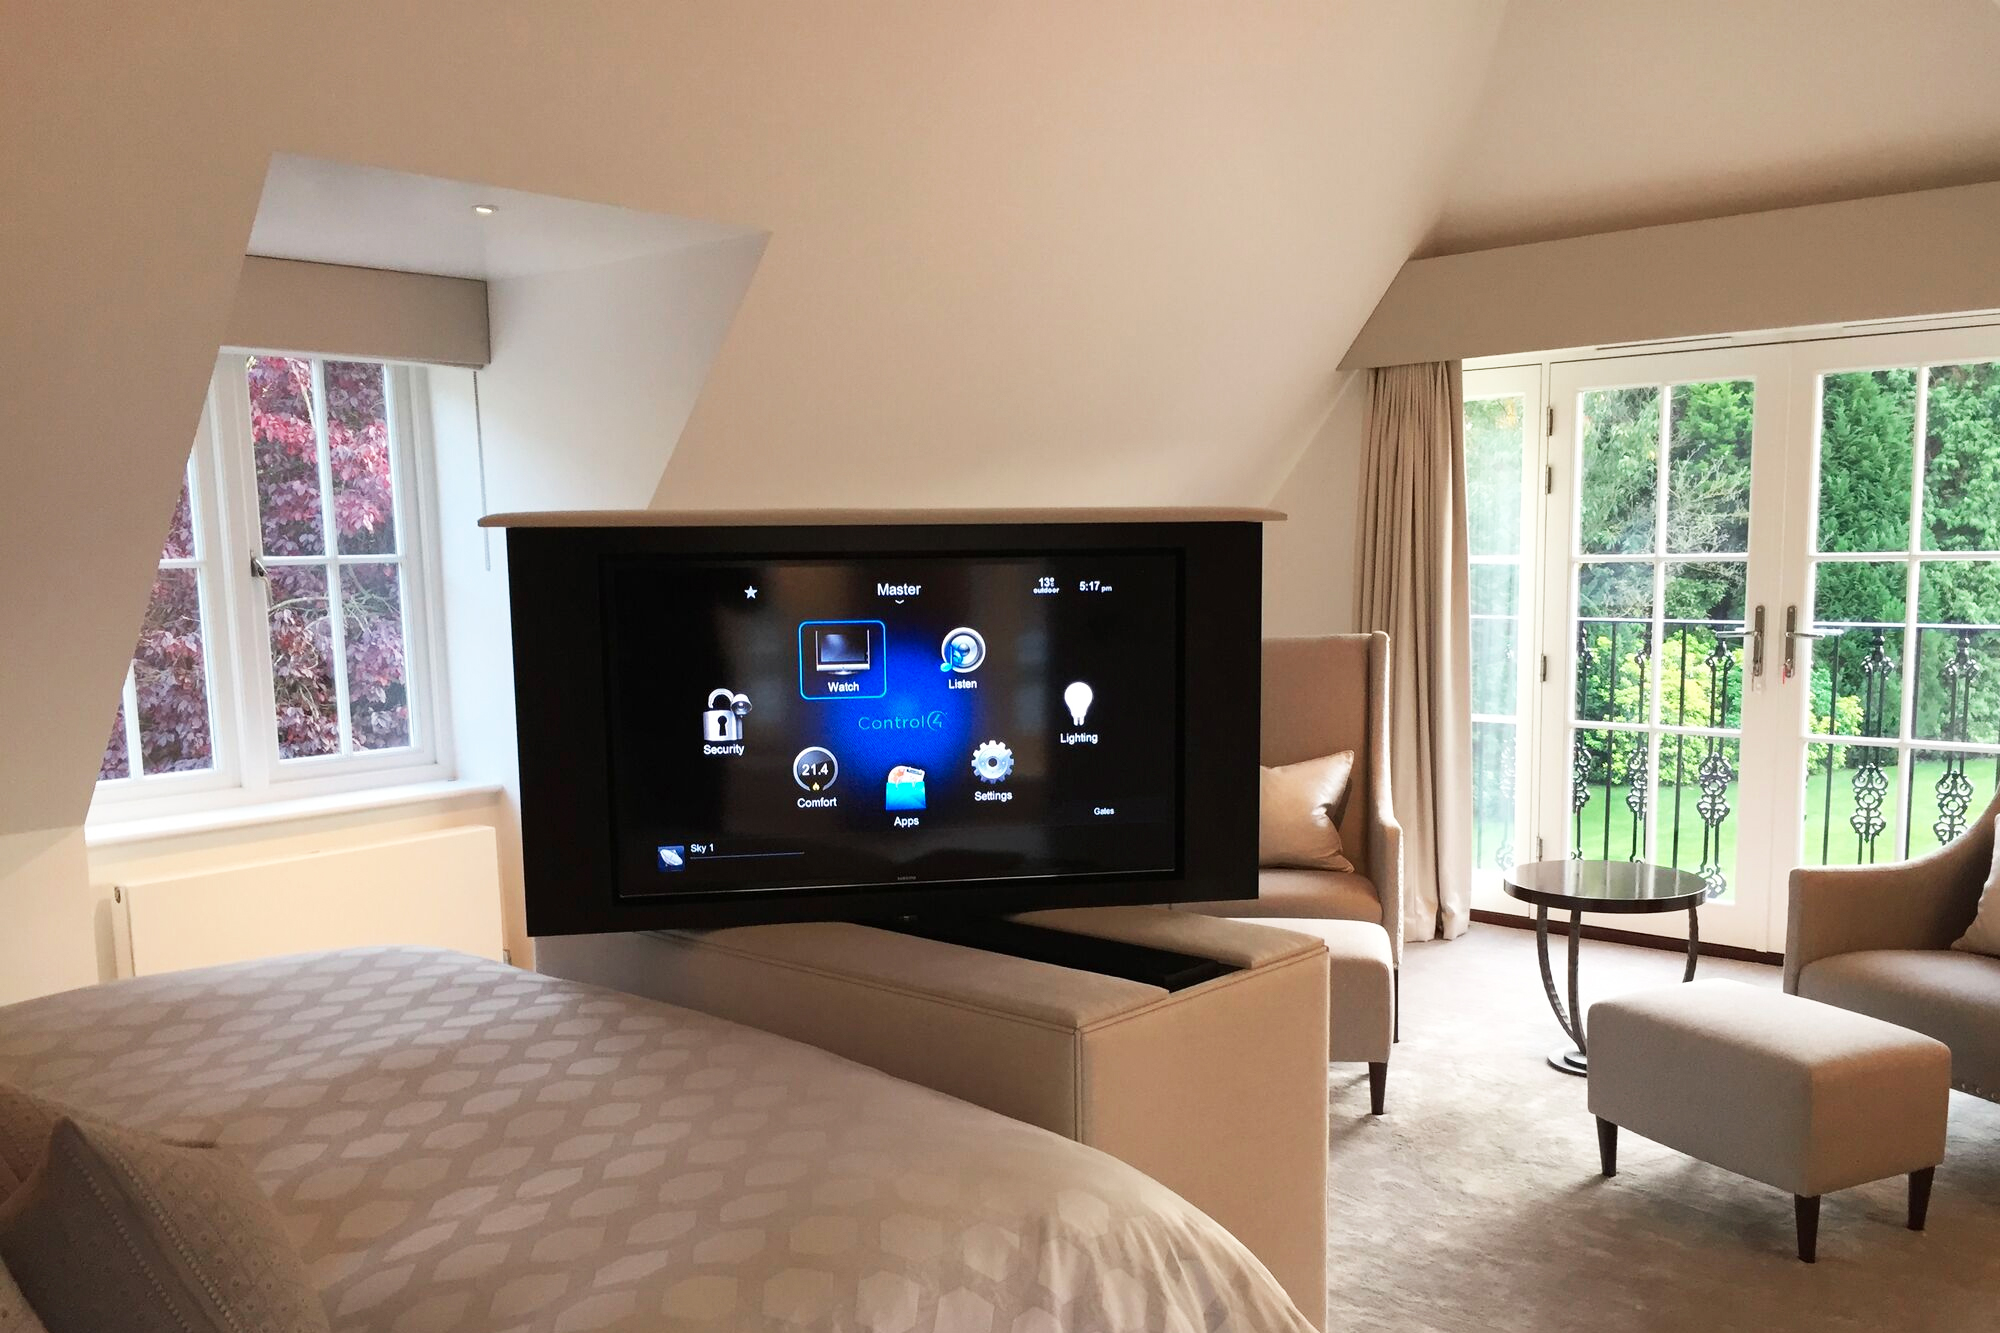 10 years of installing the finest music, home cinema and home control systems: Part 2